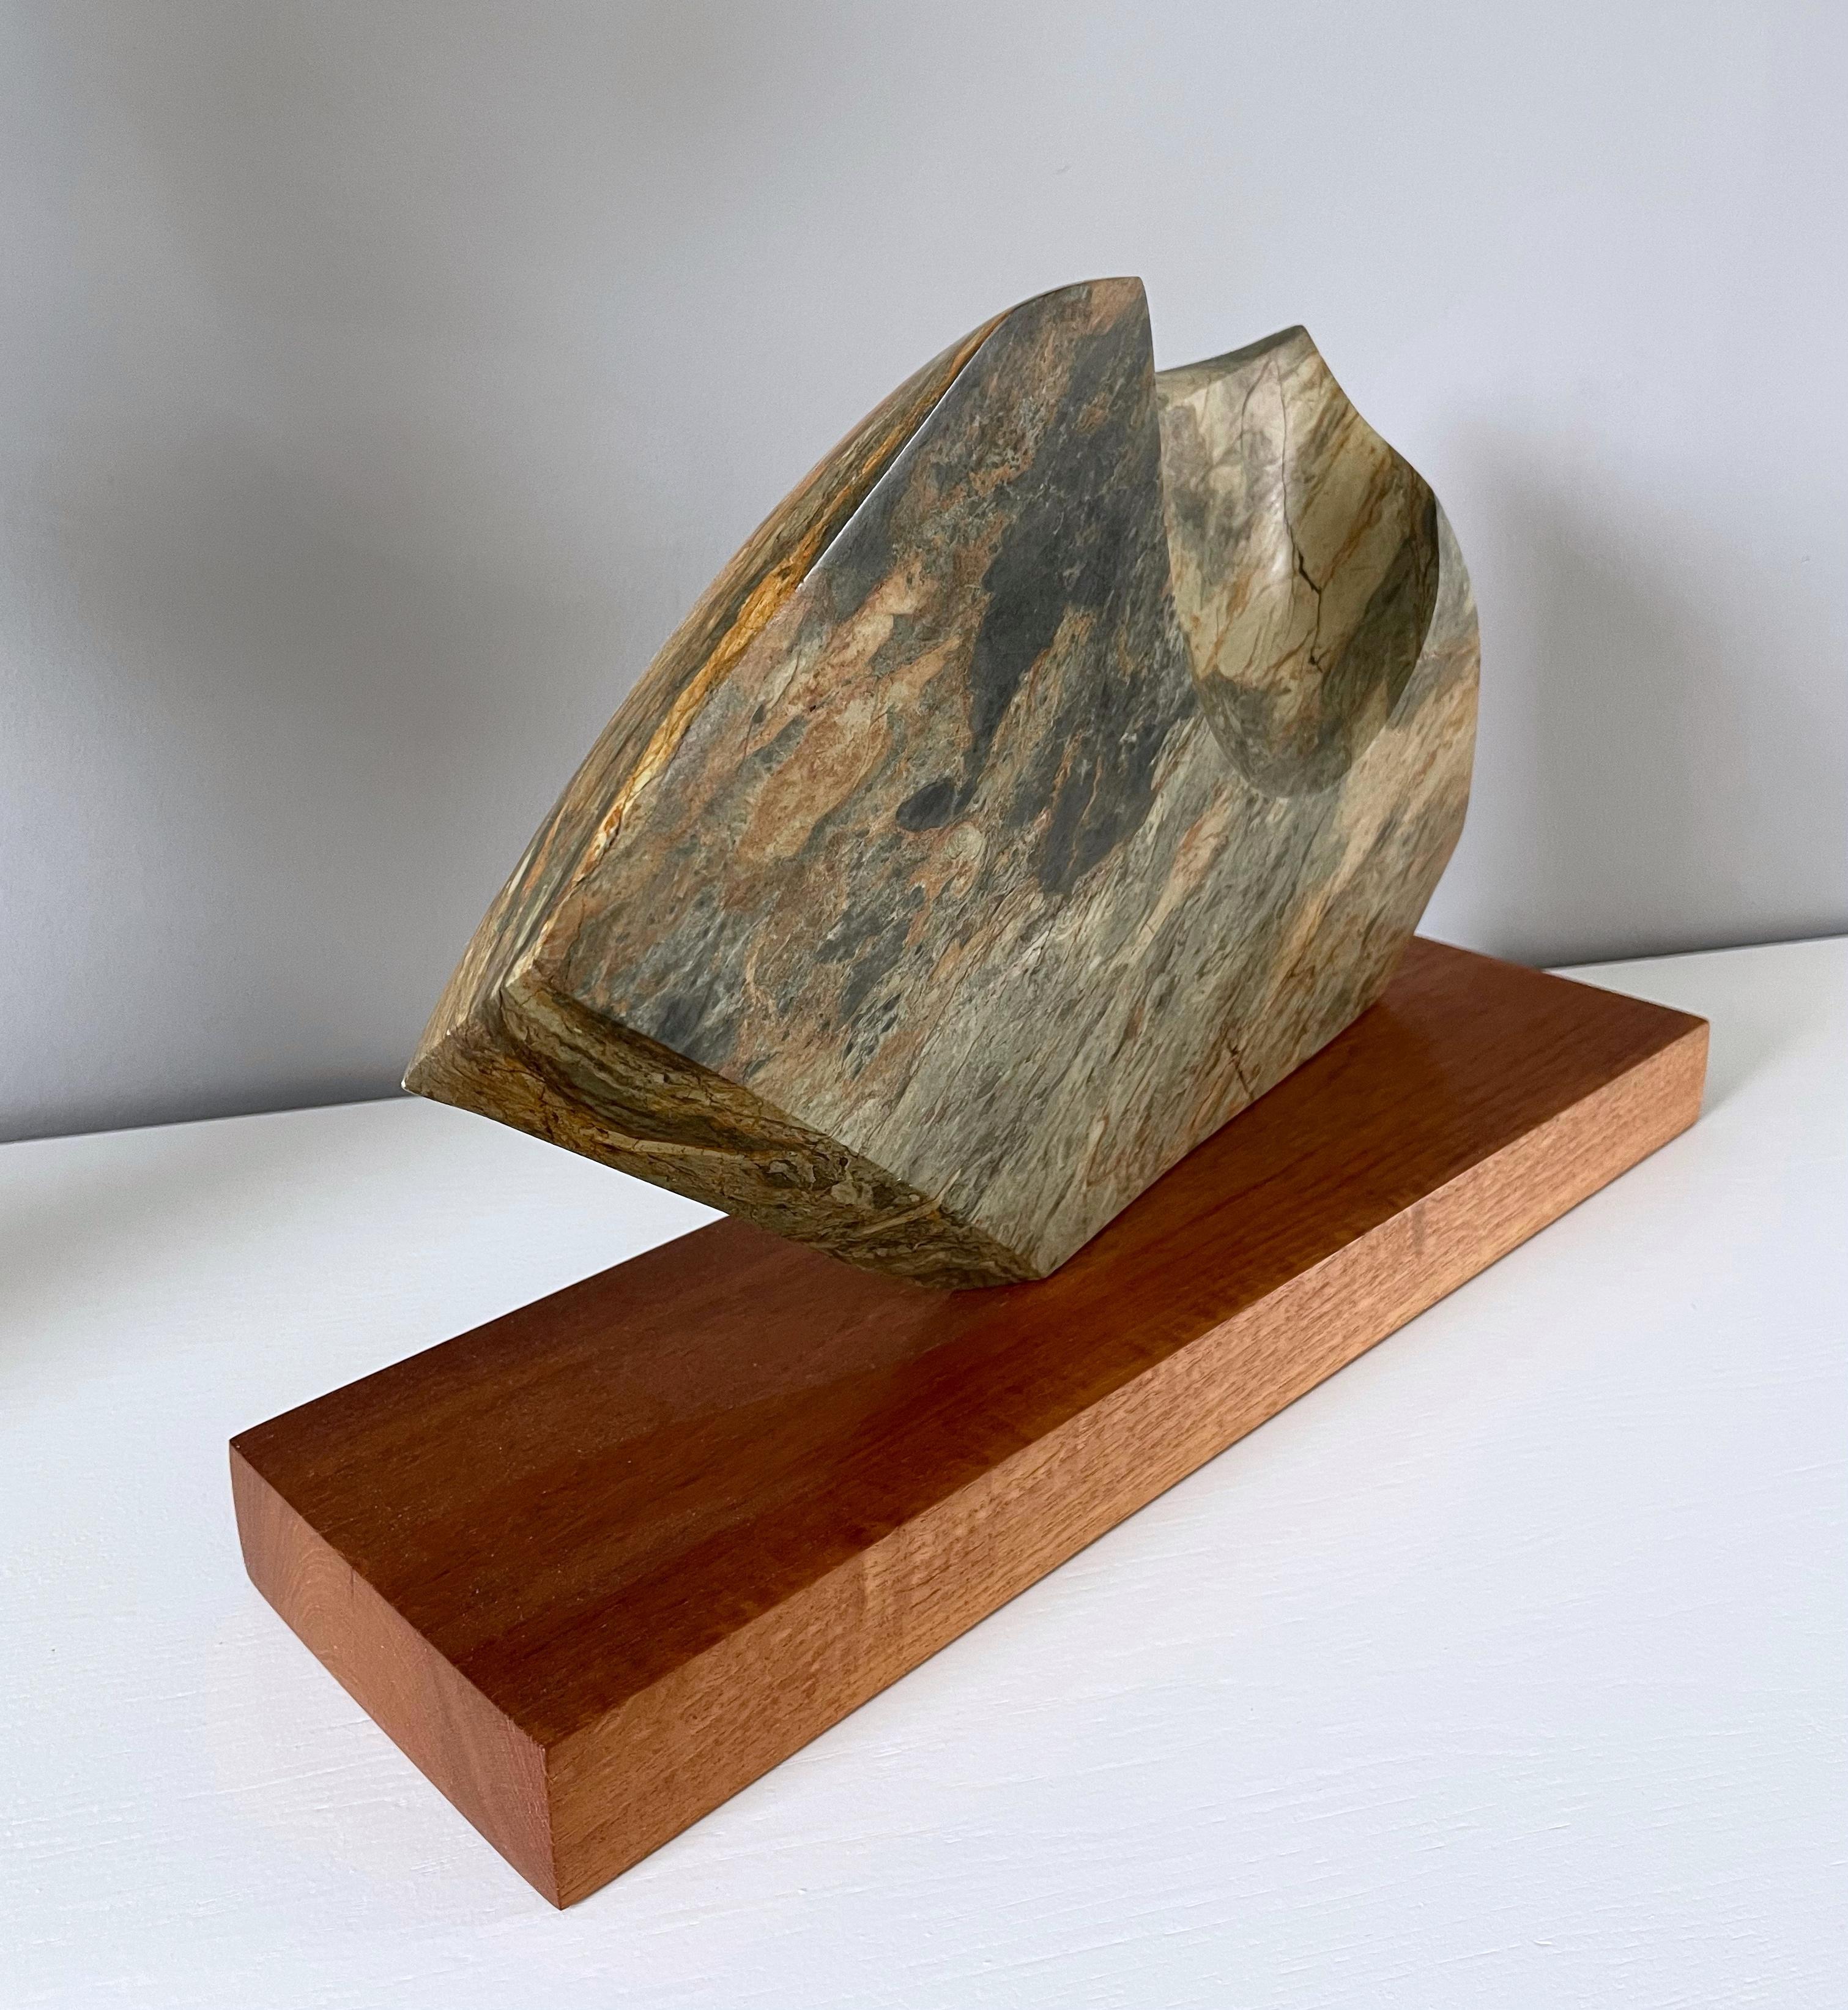 Hand-Crafted Modernist Abstract Sculpture, Green Marble, Teak, 1970s For Sale